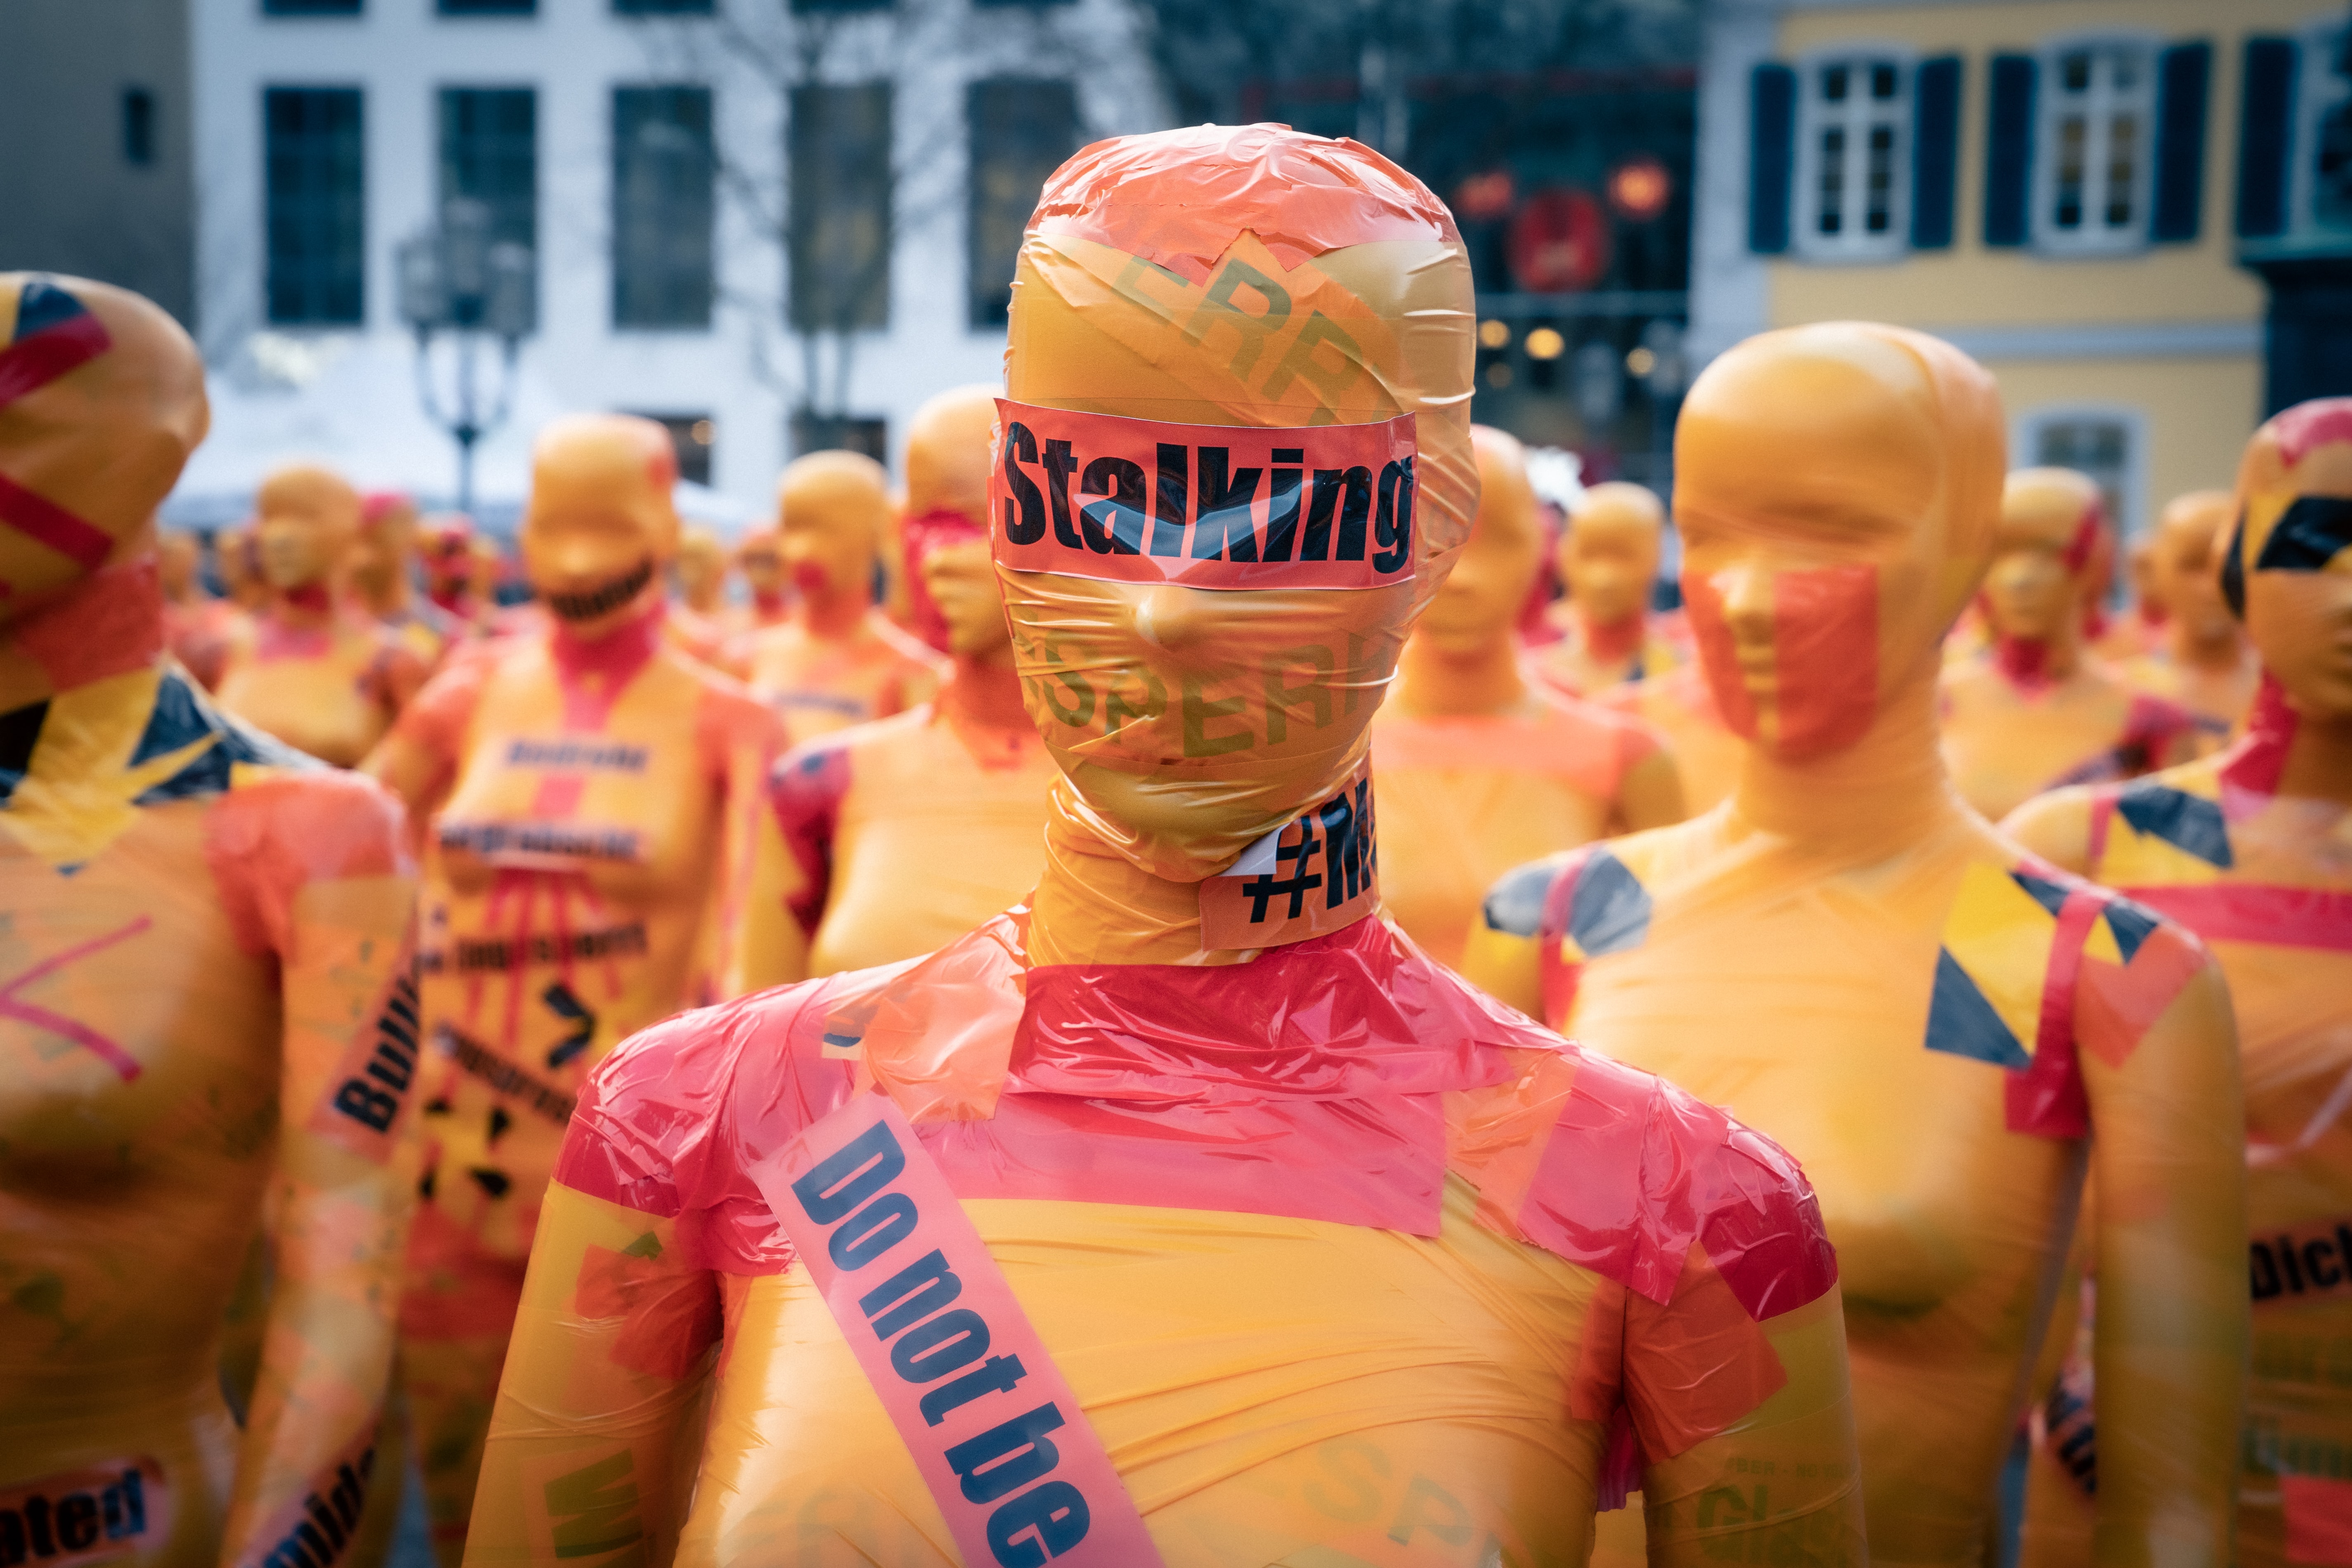 In an artistic demonstration, a series of female dummies are covered with tape with various crimes written across their faces on black tape. This doll has "stalking" across the eyes on red tape. 